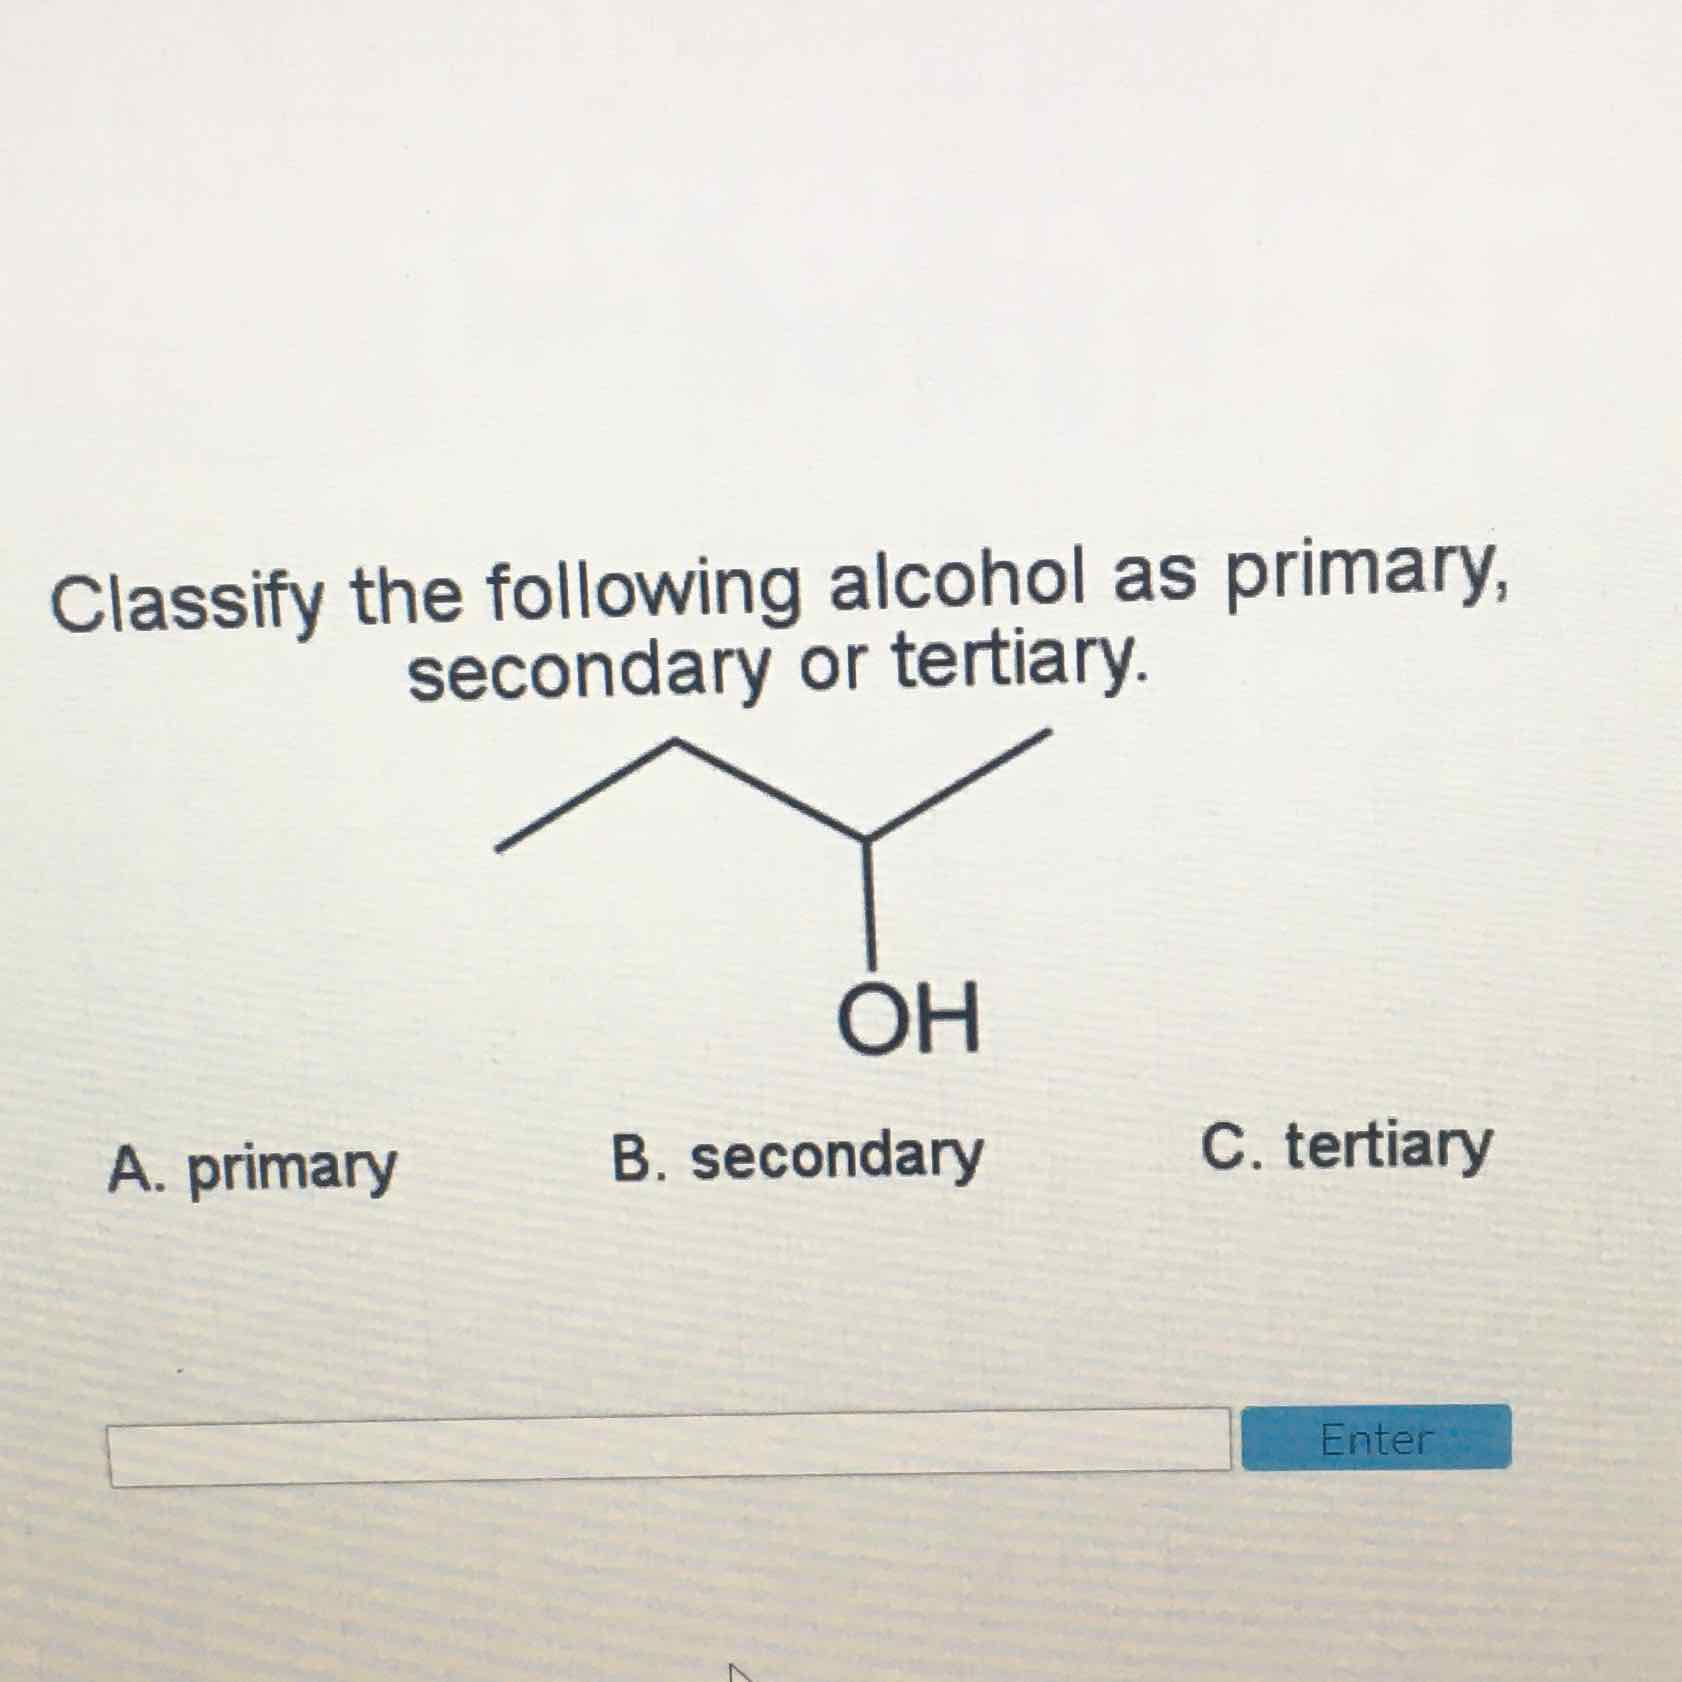 Classify the following alcohol as primary, secondary or tertiary.
A. primary
B. secondary
C. tertiary